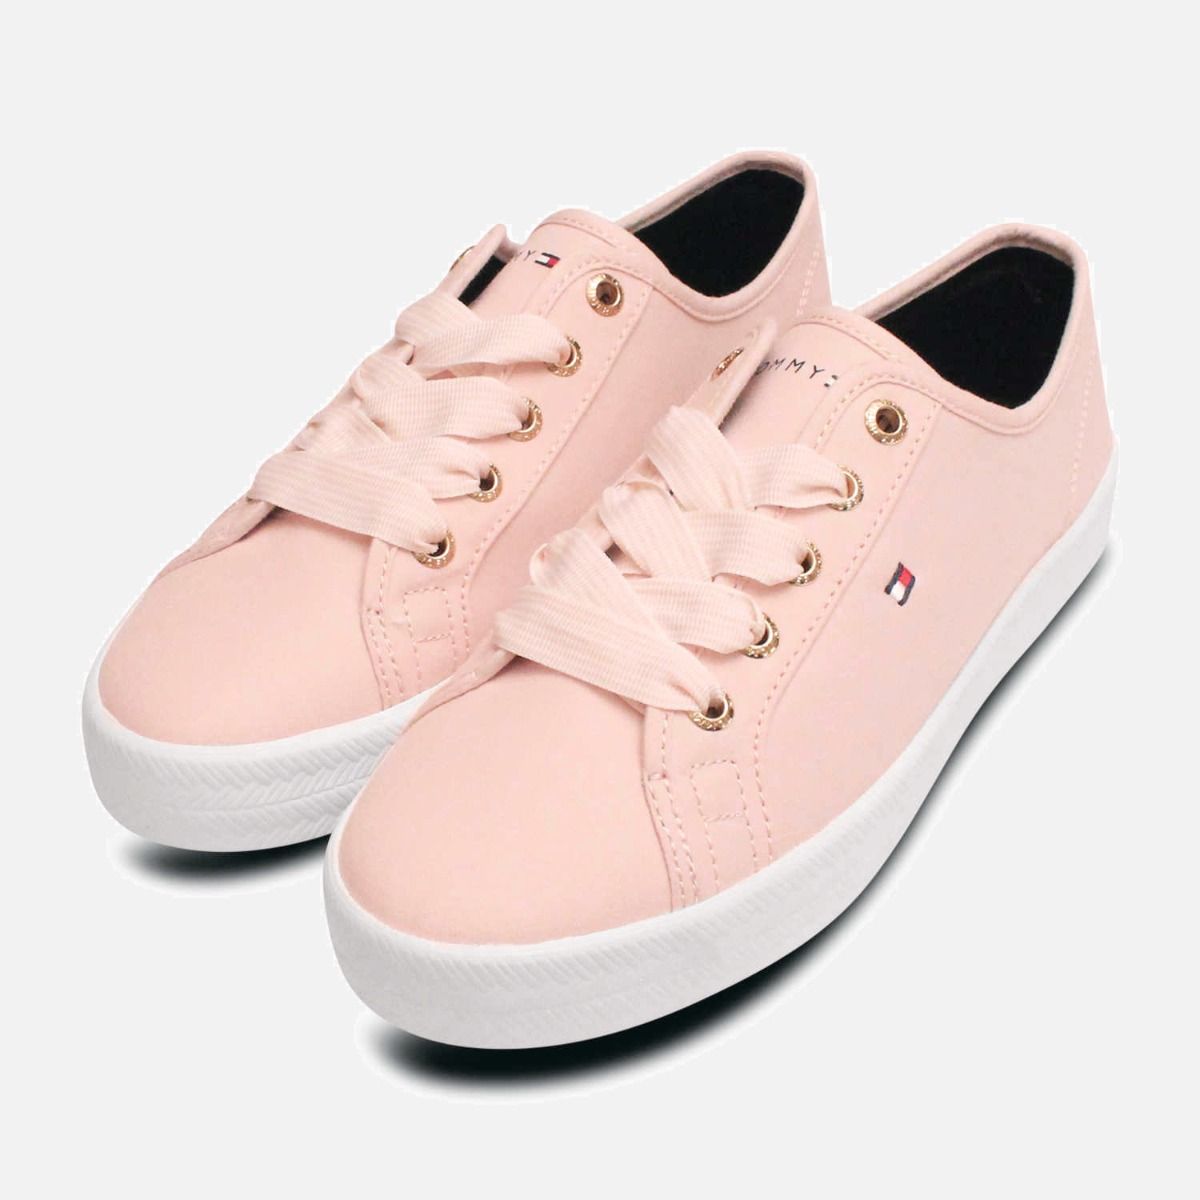 tommy hilfiger pink tennis shoes